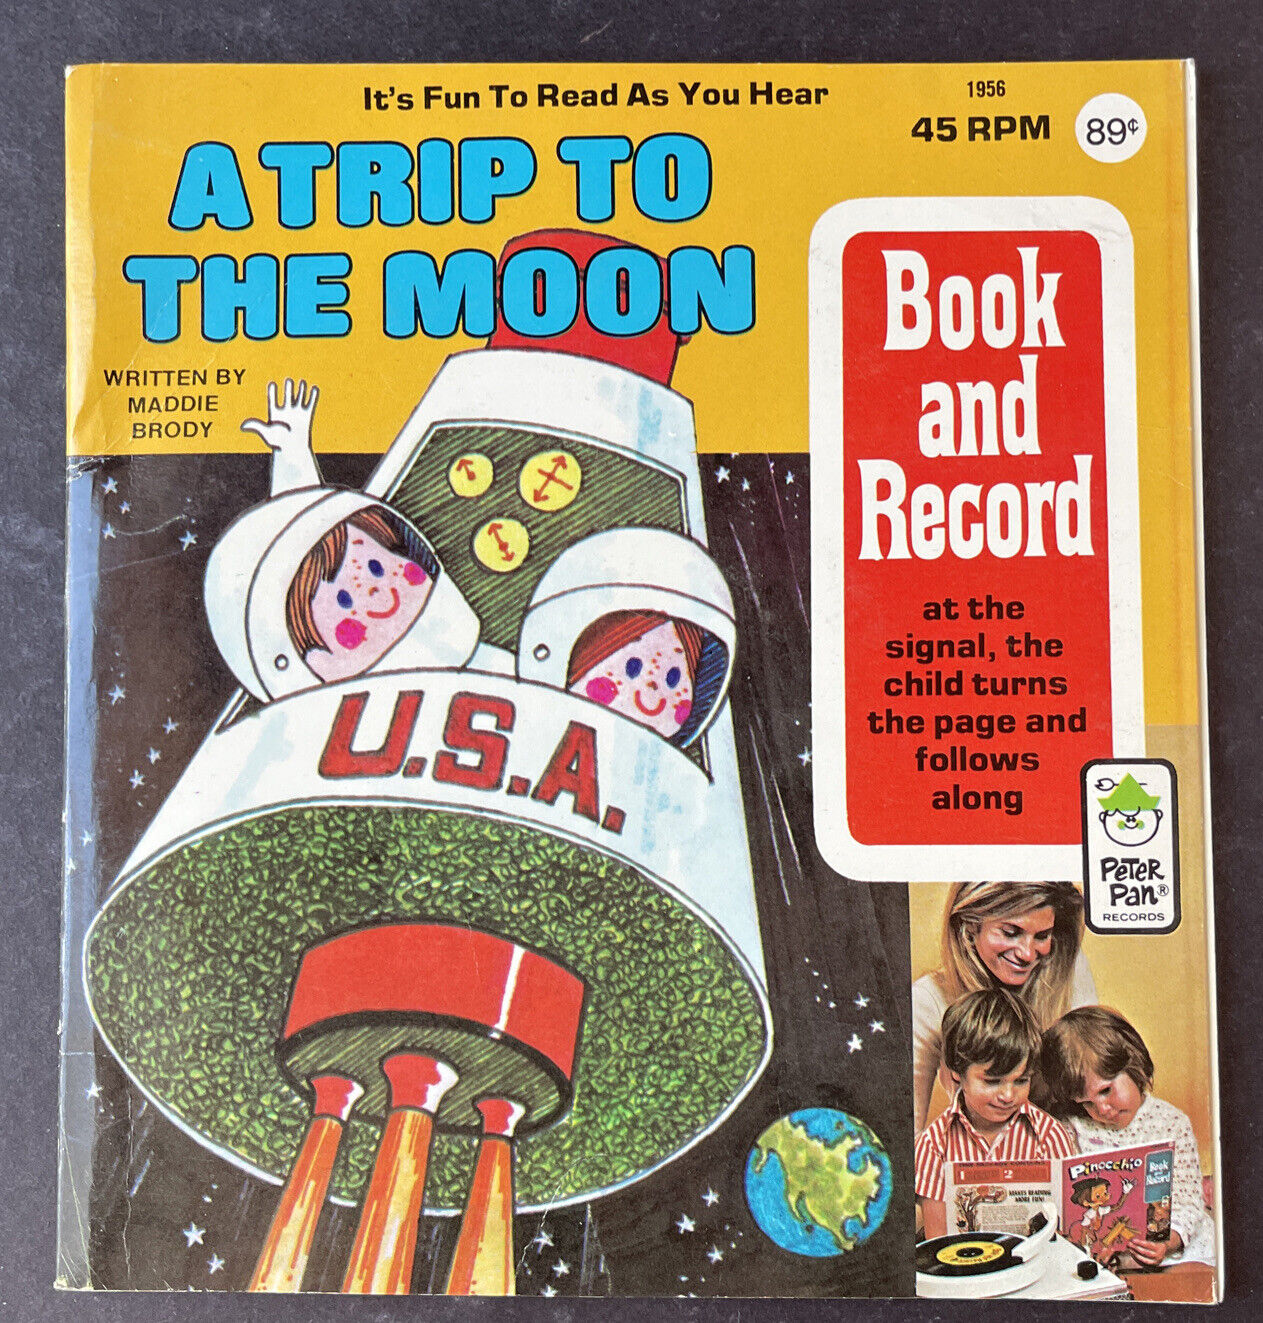 A Trip To The Moon Book And Record Peter Pan Records 45 RPM 1956